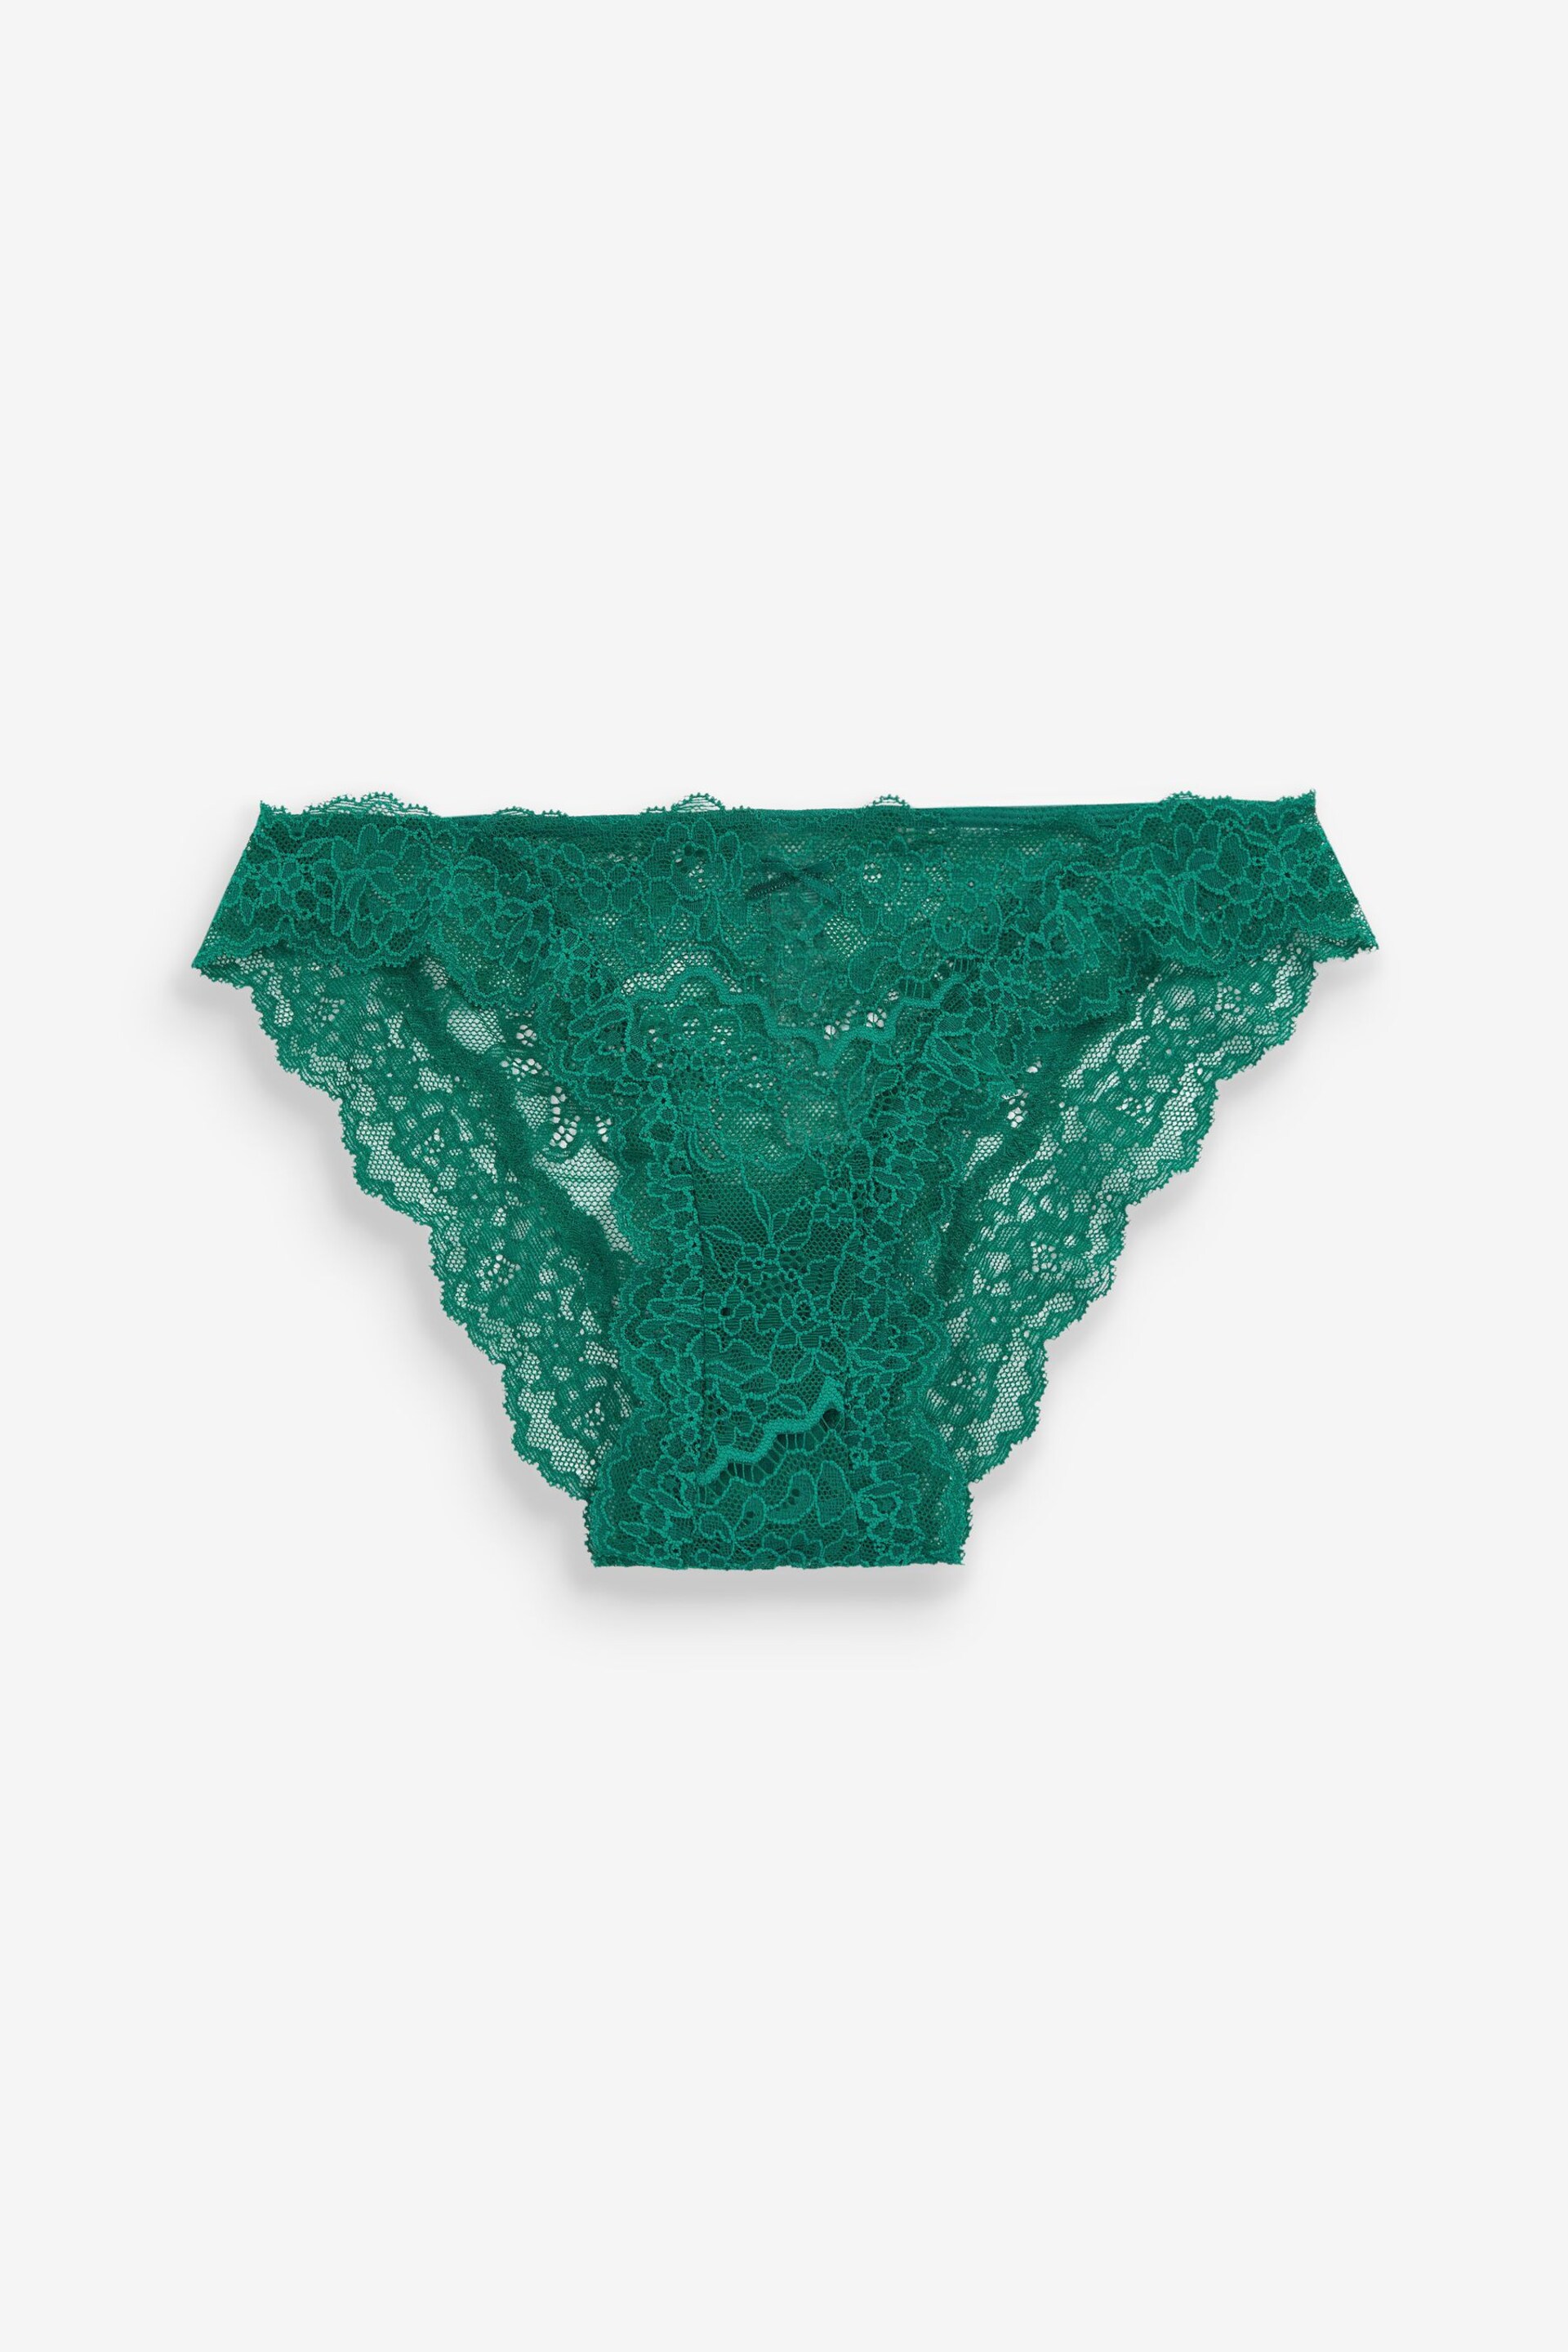 Victoria's Secret Spruce Green Cheeky Knickers - Image 1 of 3